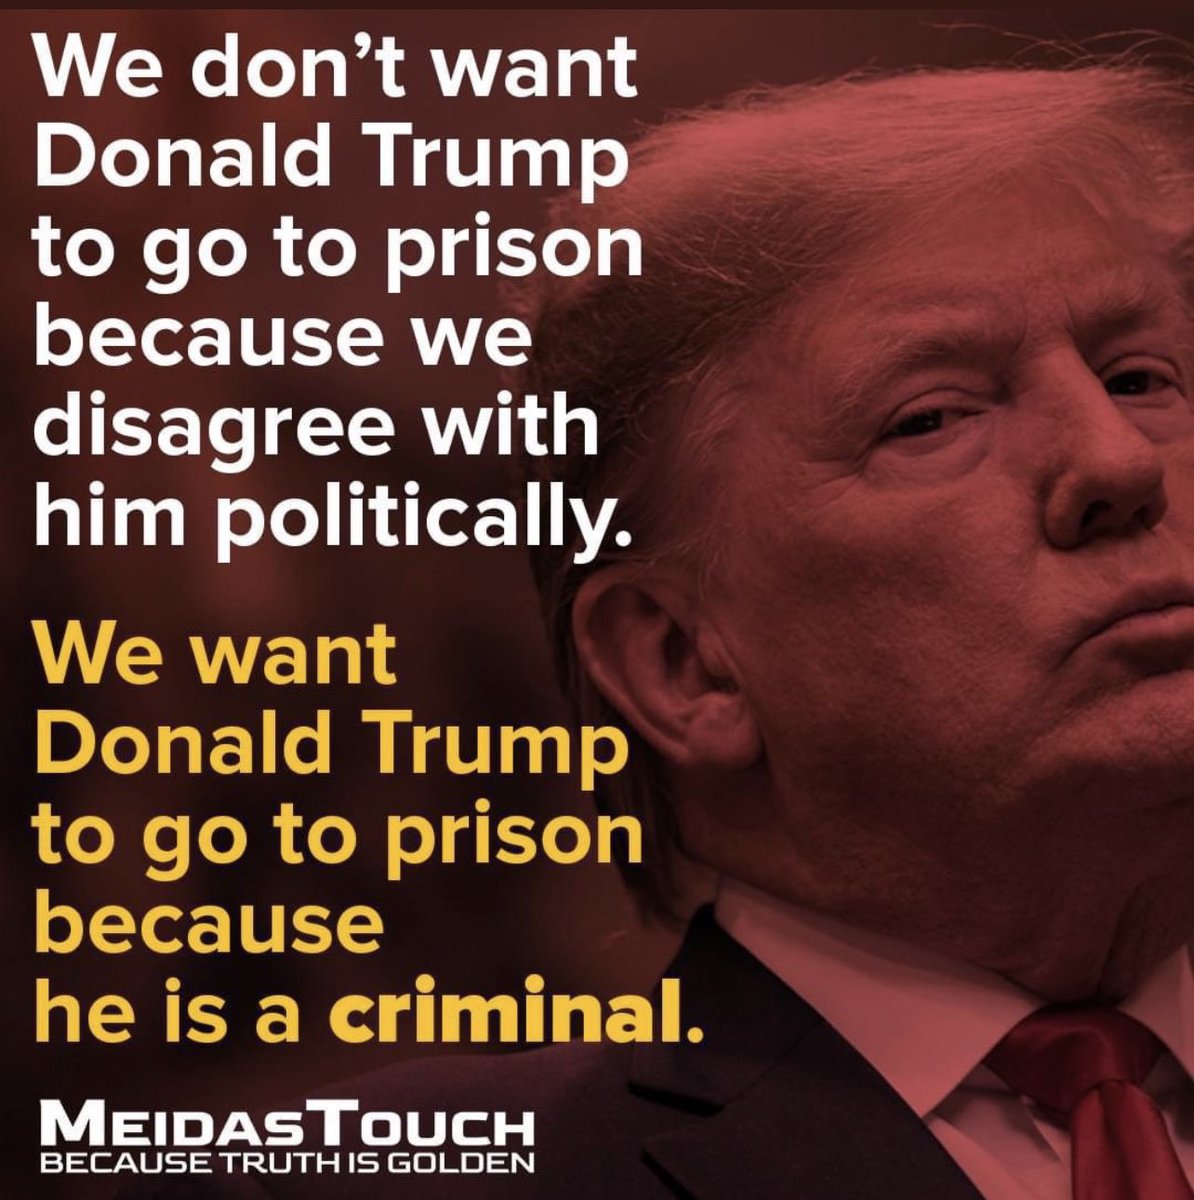 @hierophantess @Acyn I want Trump to go to prison because he’s a fucken criminal!! #TrumpRally